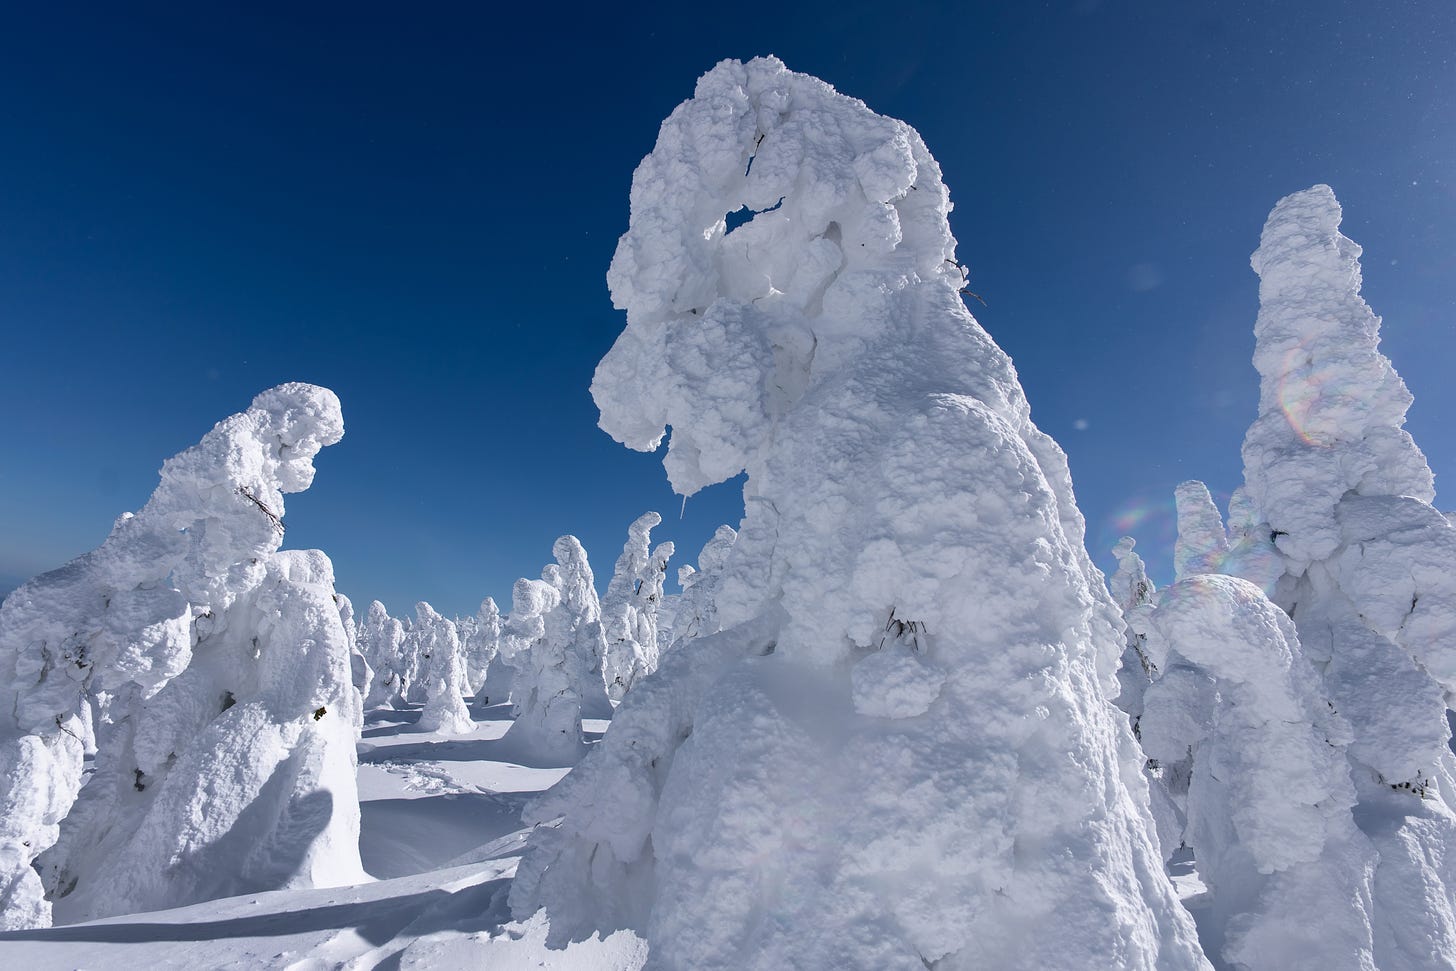 Snow-covered trees, known as "snow monsters" or "Juhyo" in Japanese, are seen on Mount Zao on February 13, 2024 in Yamagata, Japan. (Photo by Tomohiro Ohsumi/Getty Images.)